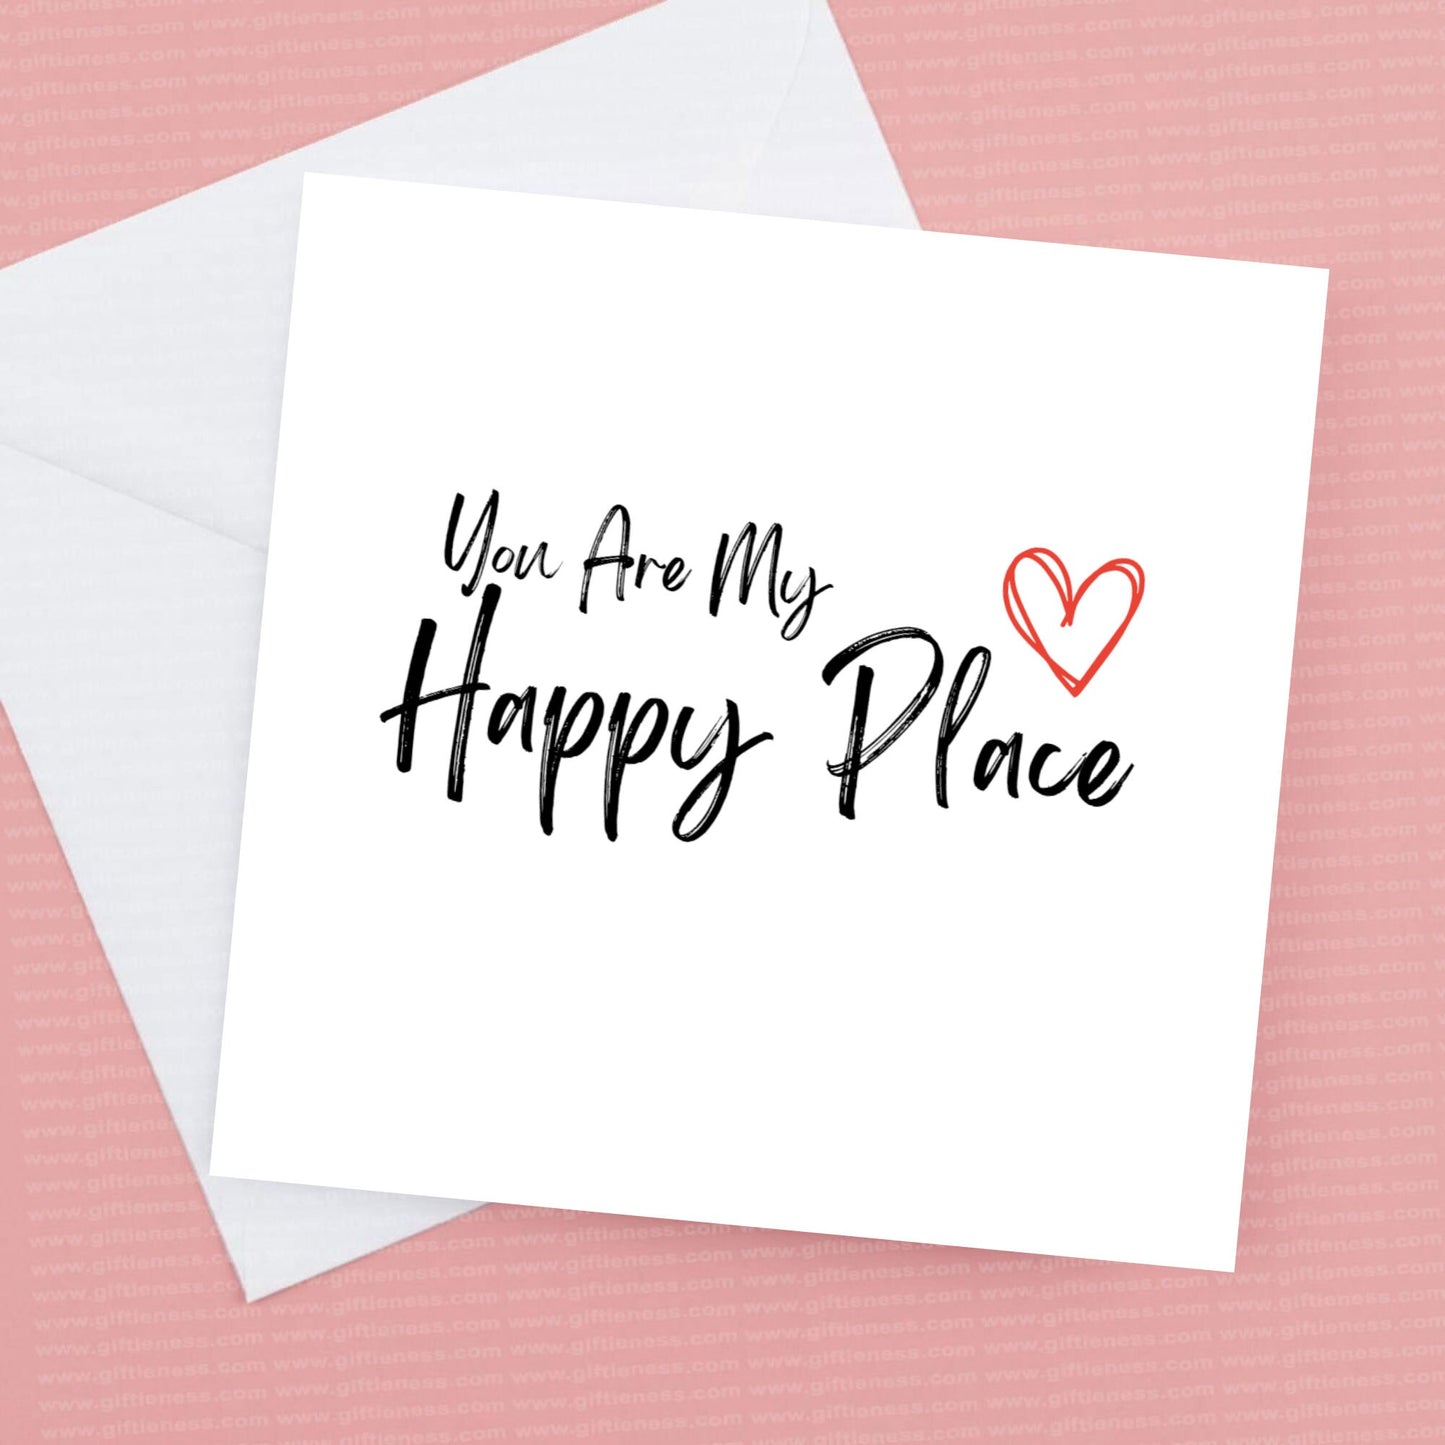 You are my happy place card